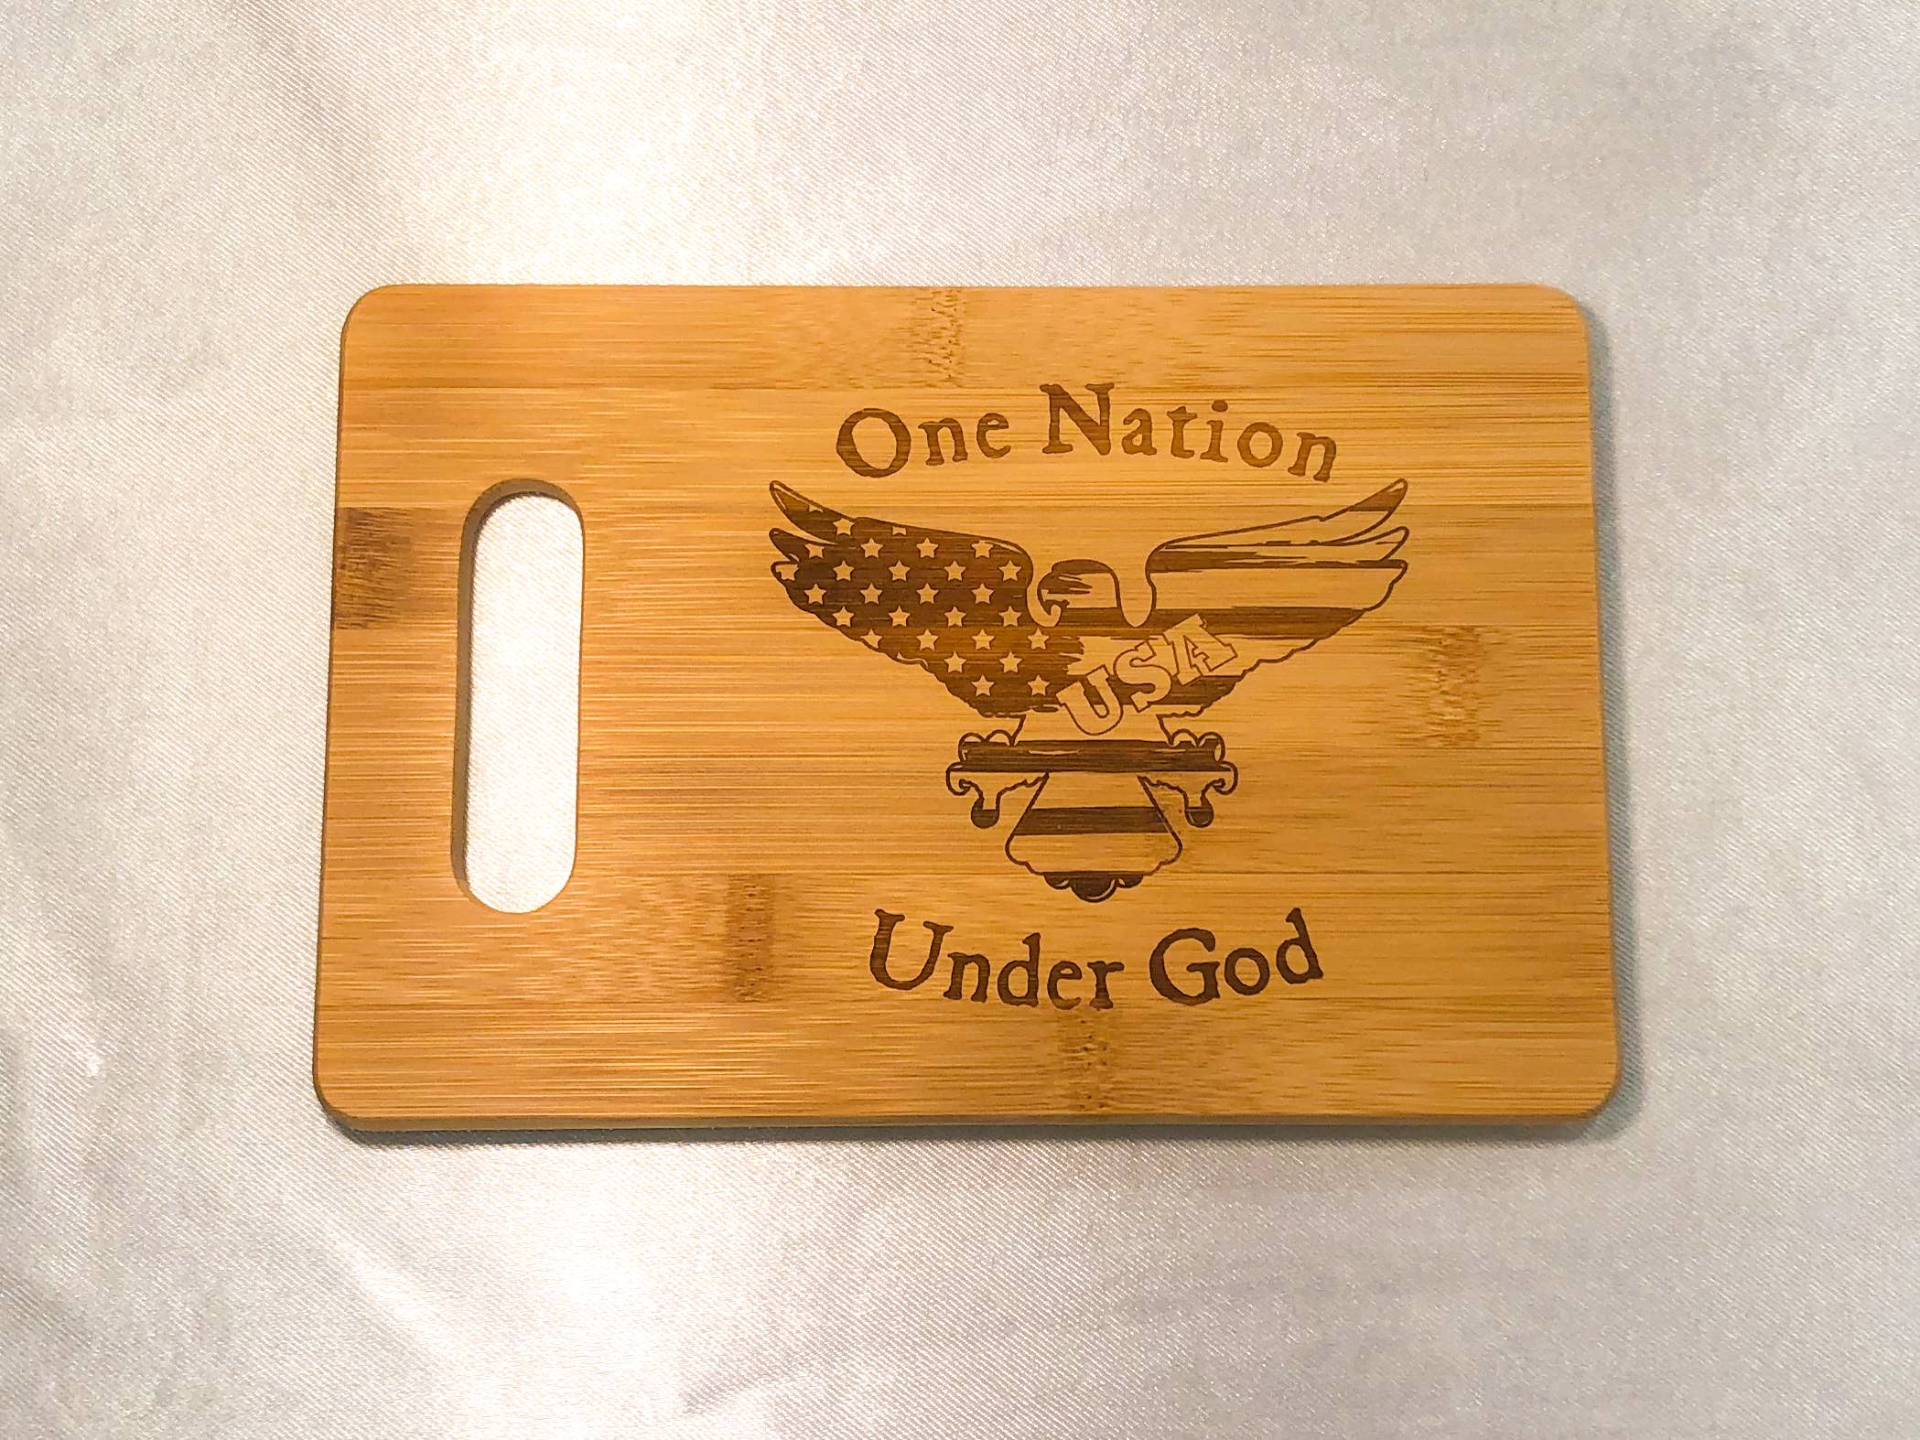 9x6" Engraved Bamboo Cutting Board (can be customized), Goodies N Stuff